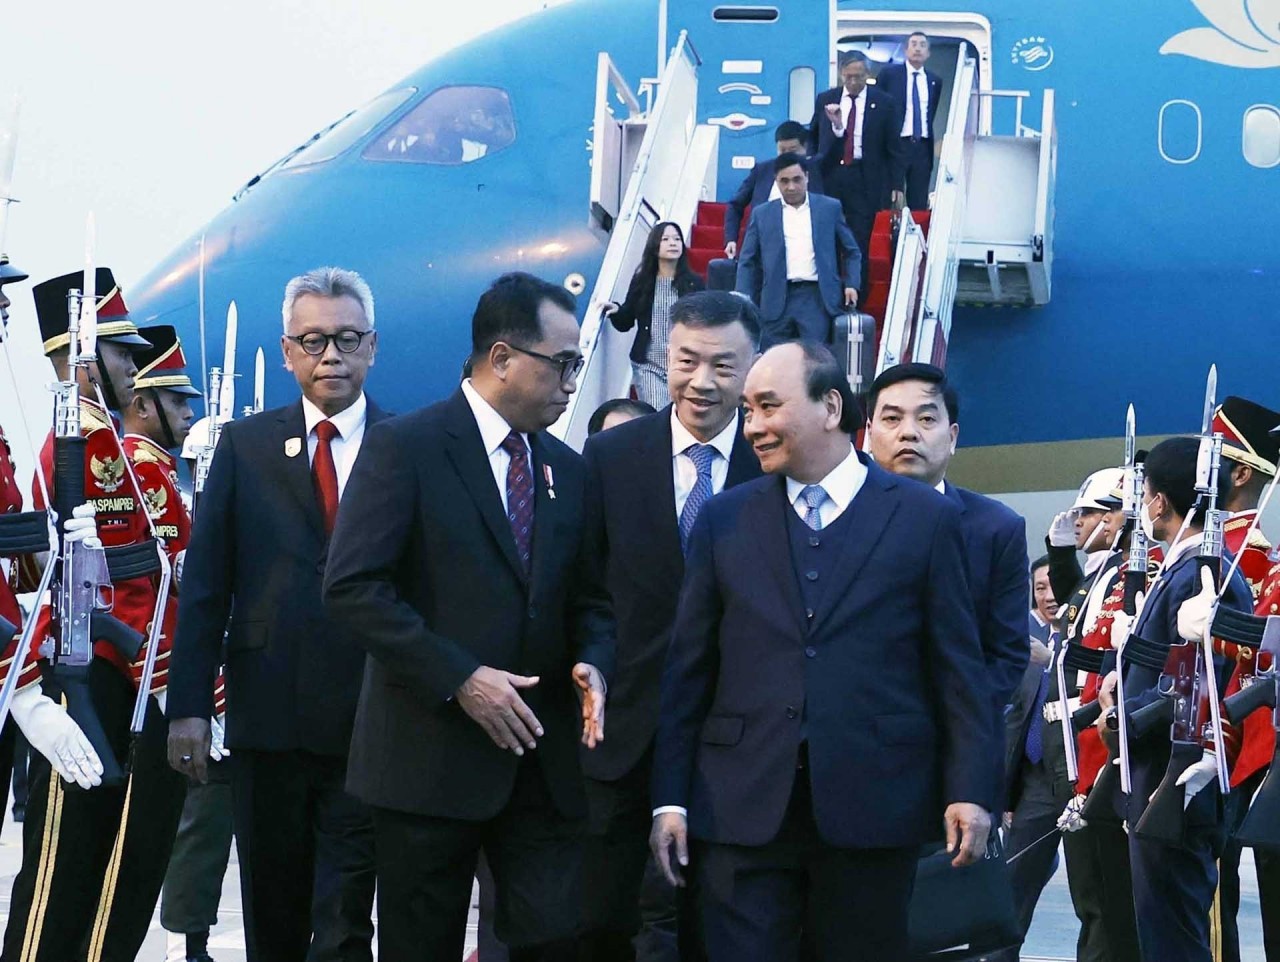 President Nguyen Xuan Phuc arrives in Jakarta, begins State visit to Indonesia